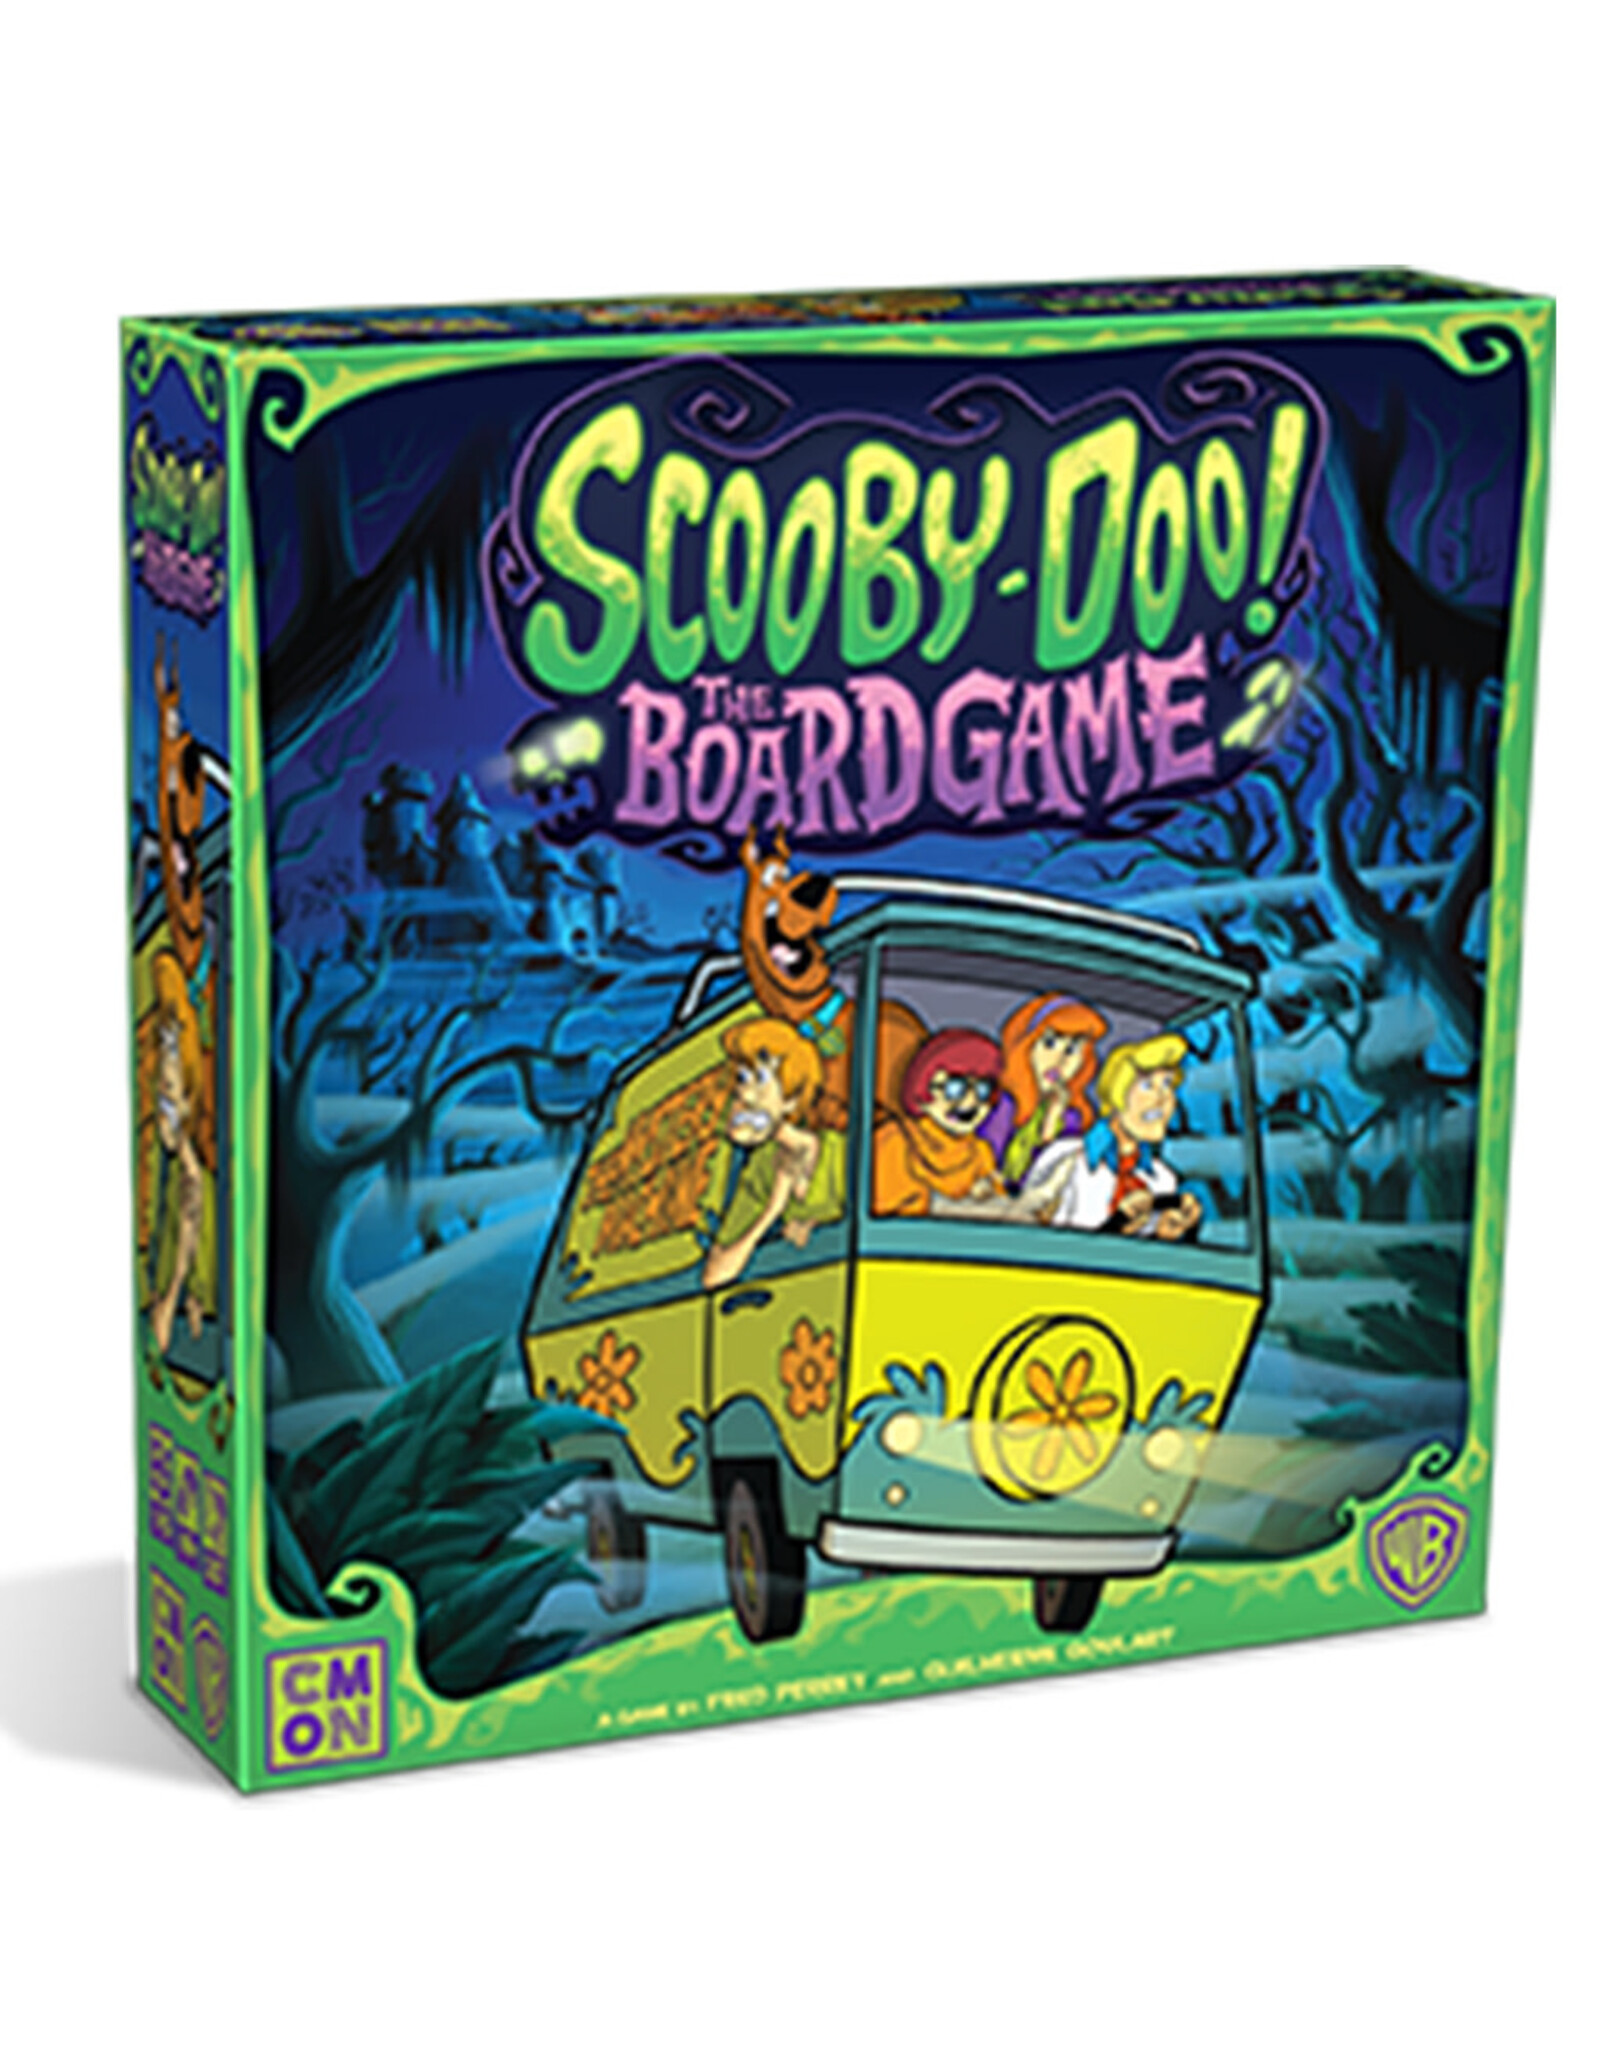 CMON Scooby-Doo!: The Board Game